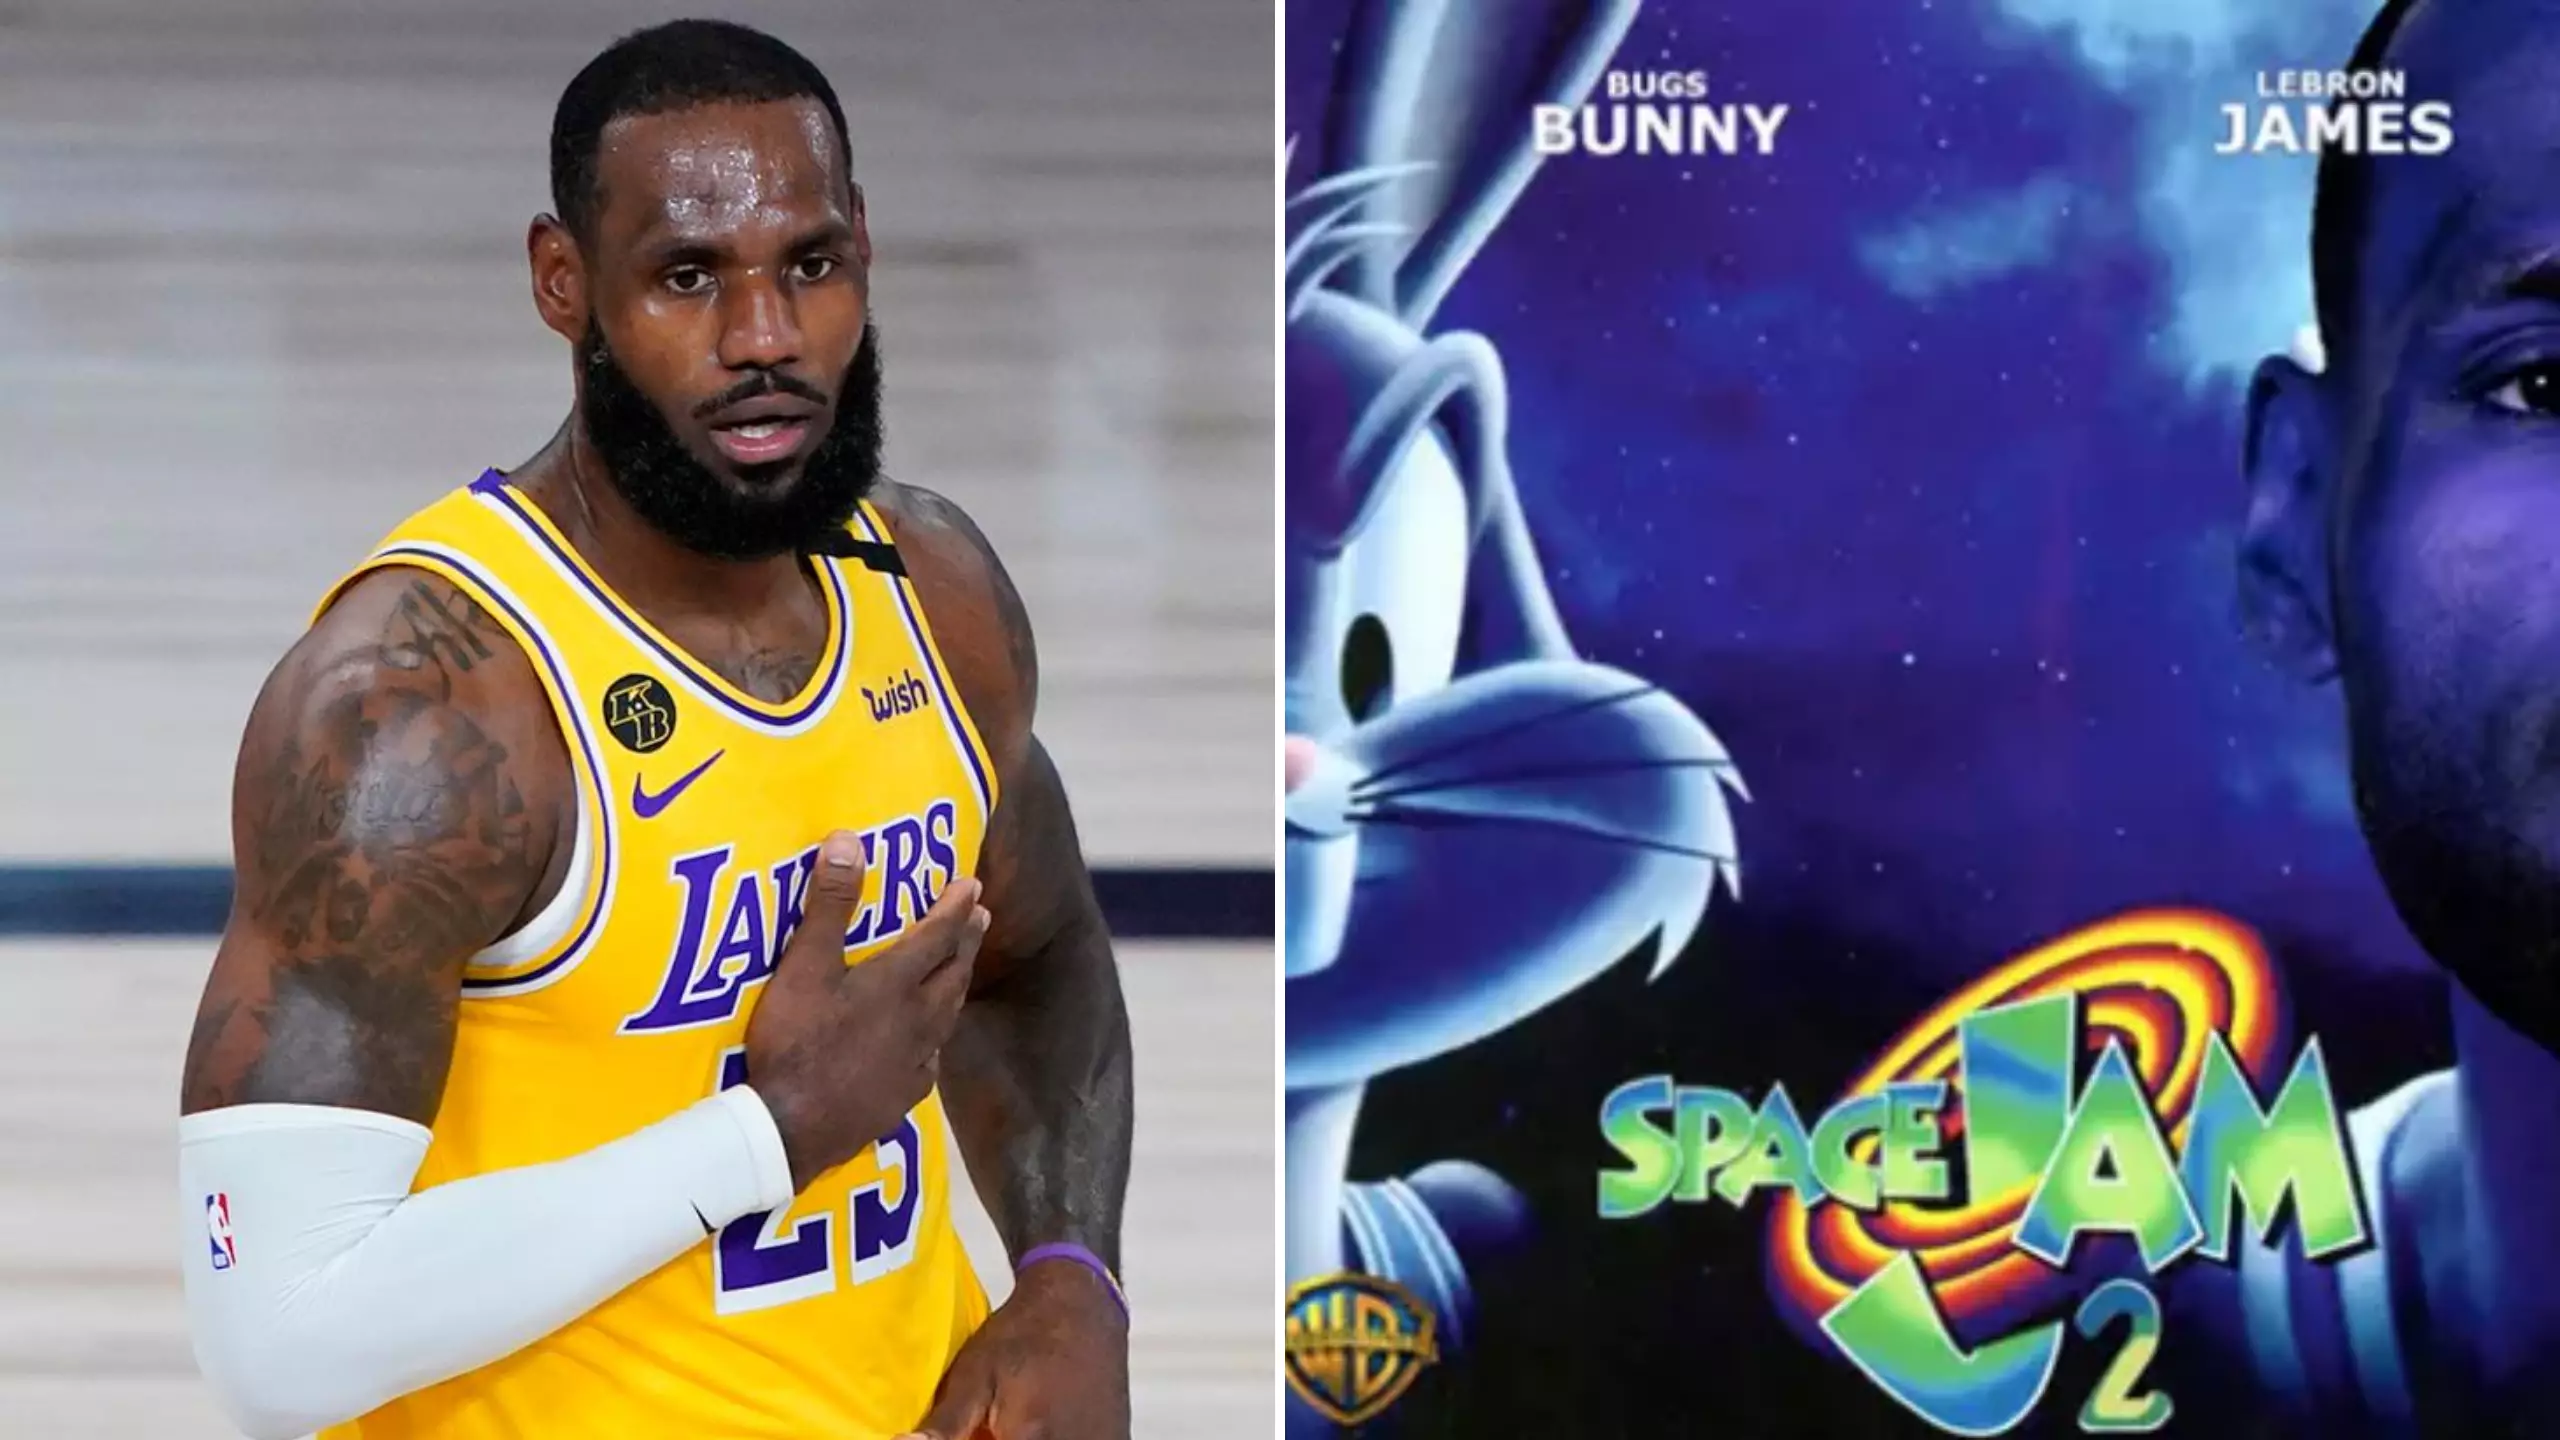 LeBron James Gives Fans A Sneak Peak At Space Jam 2 Jersey